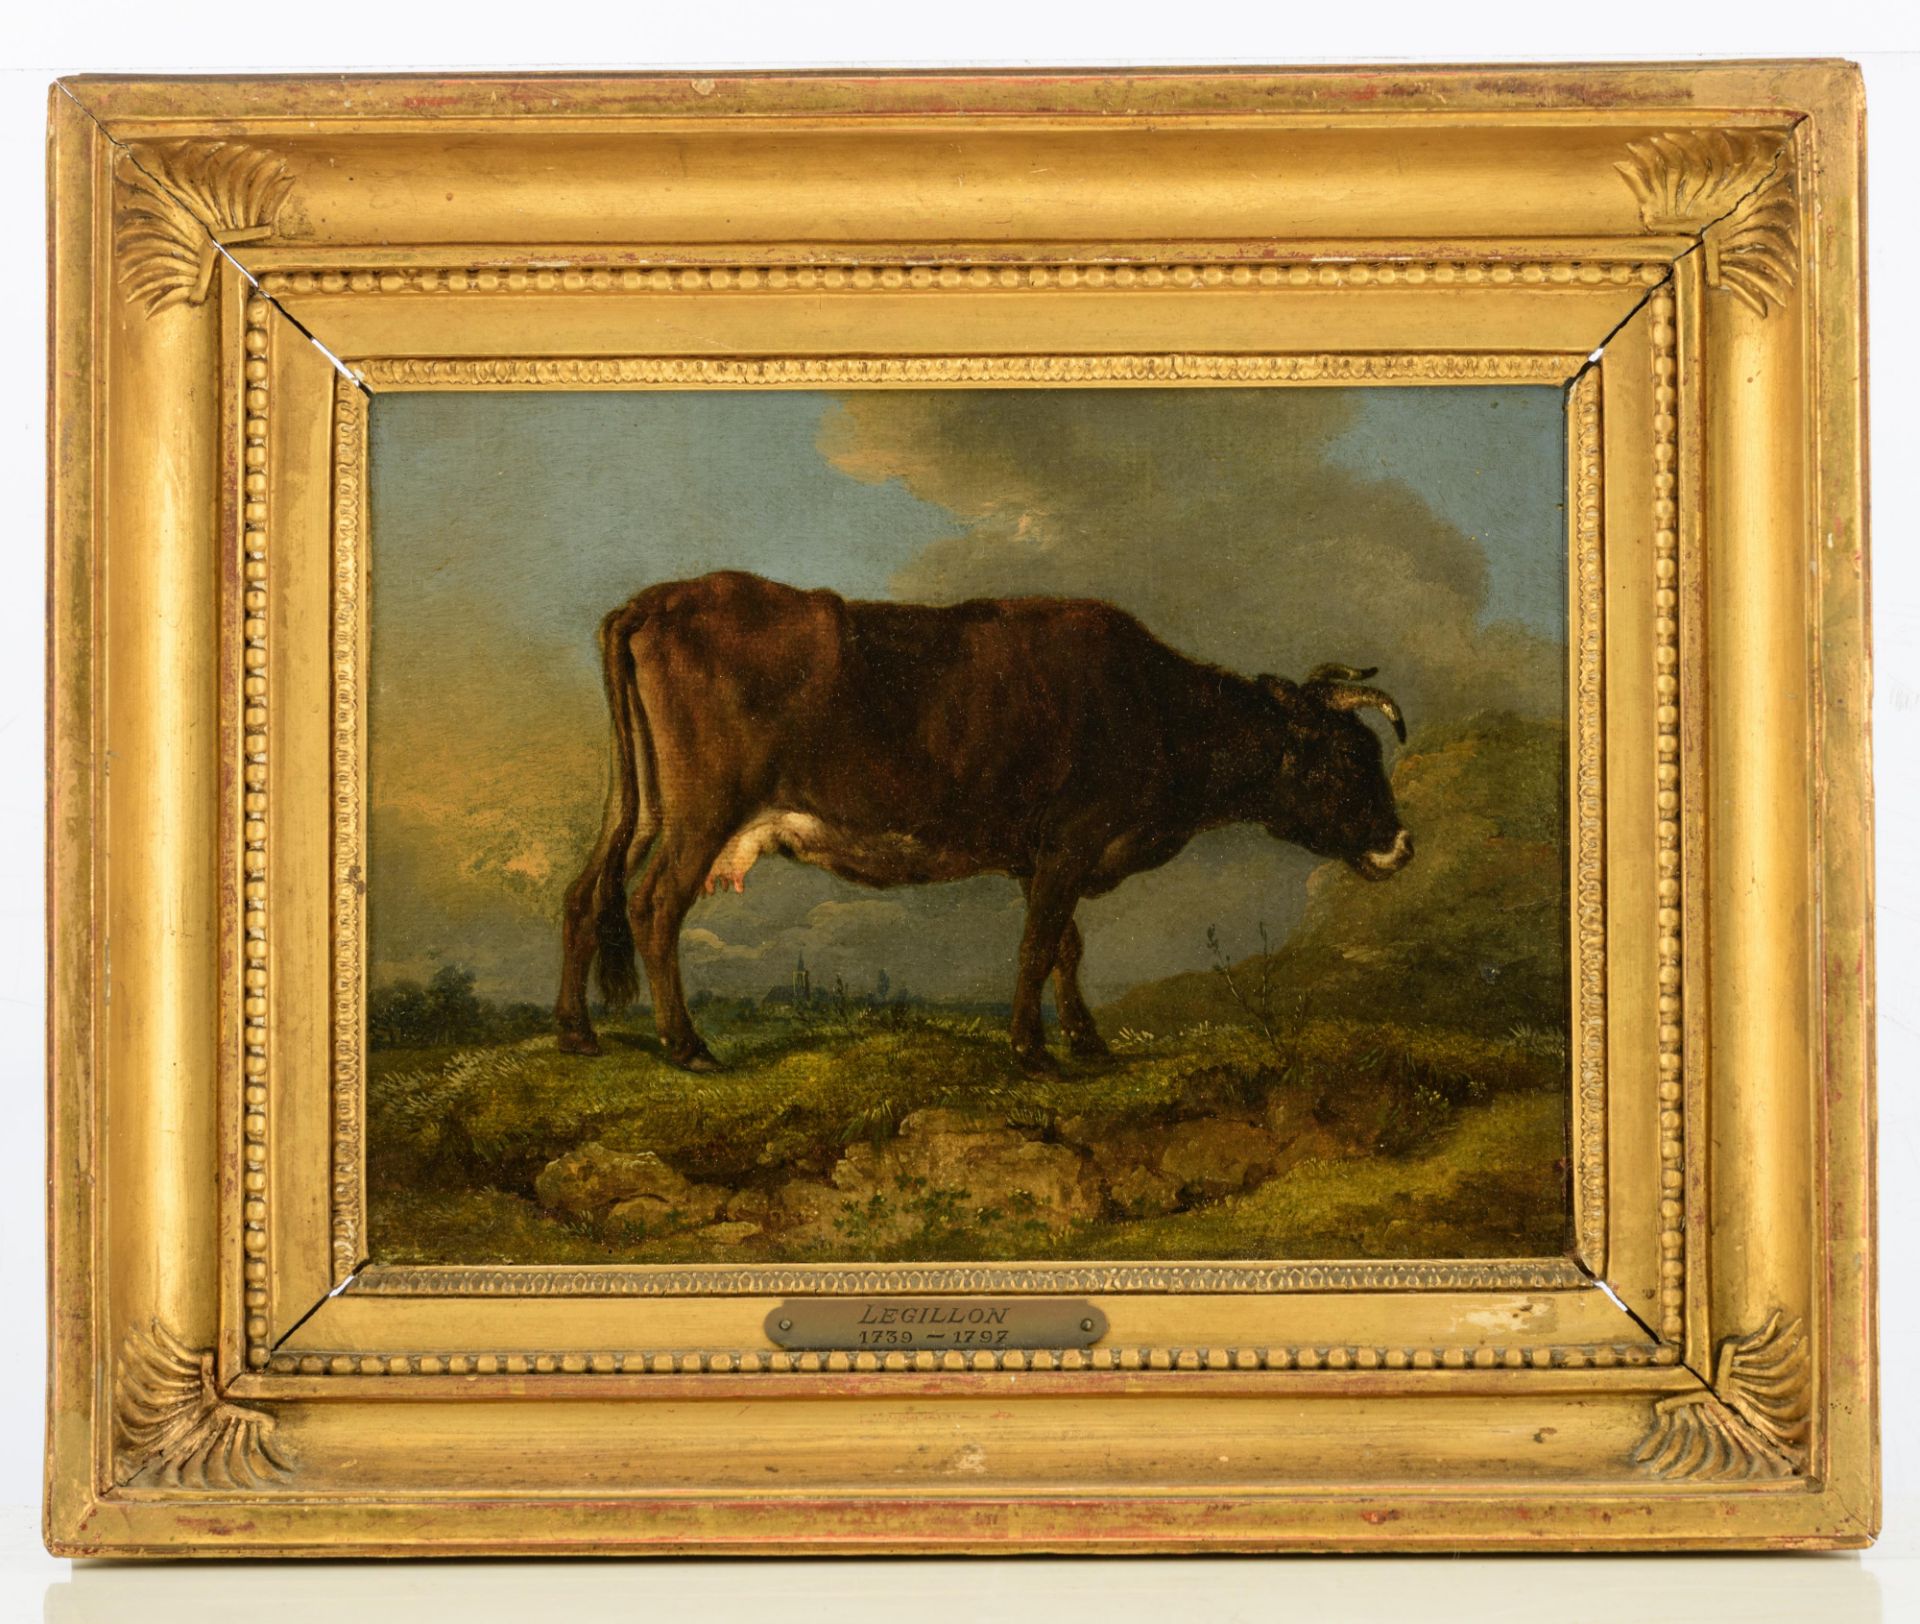 Legillon J.F., a grazing cow, dated 1785, oil on canvas, 21,5 x 28,5 cm - Image 2 of 8